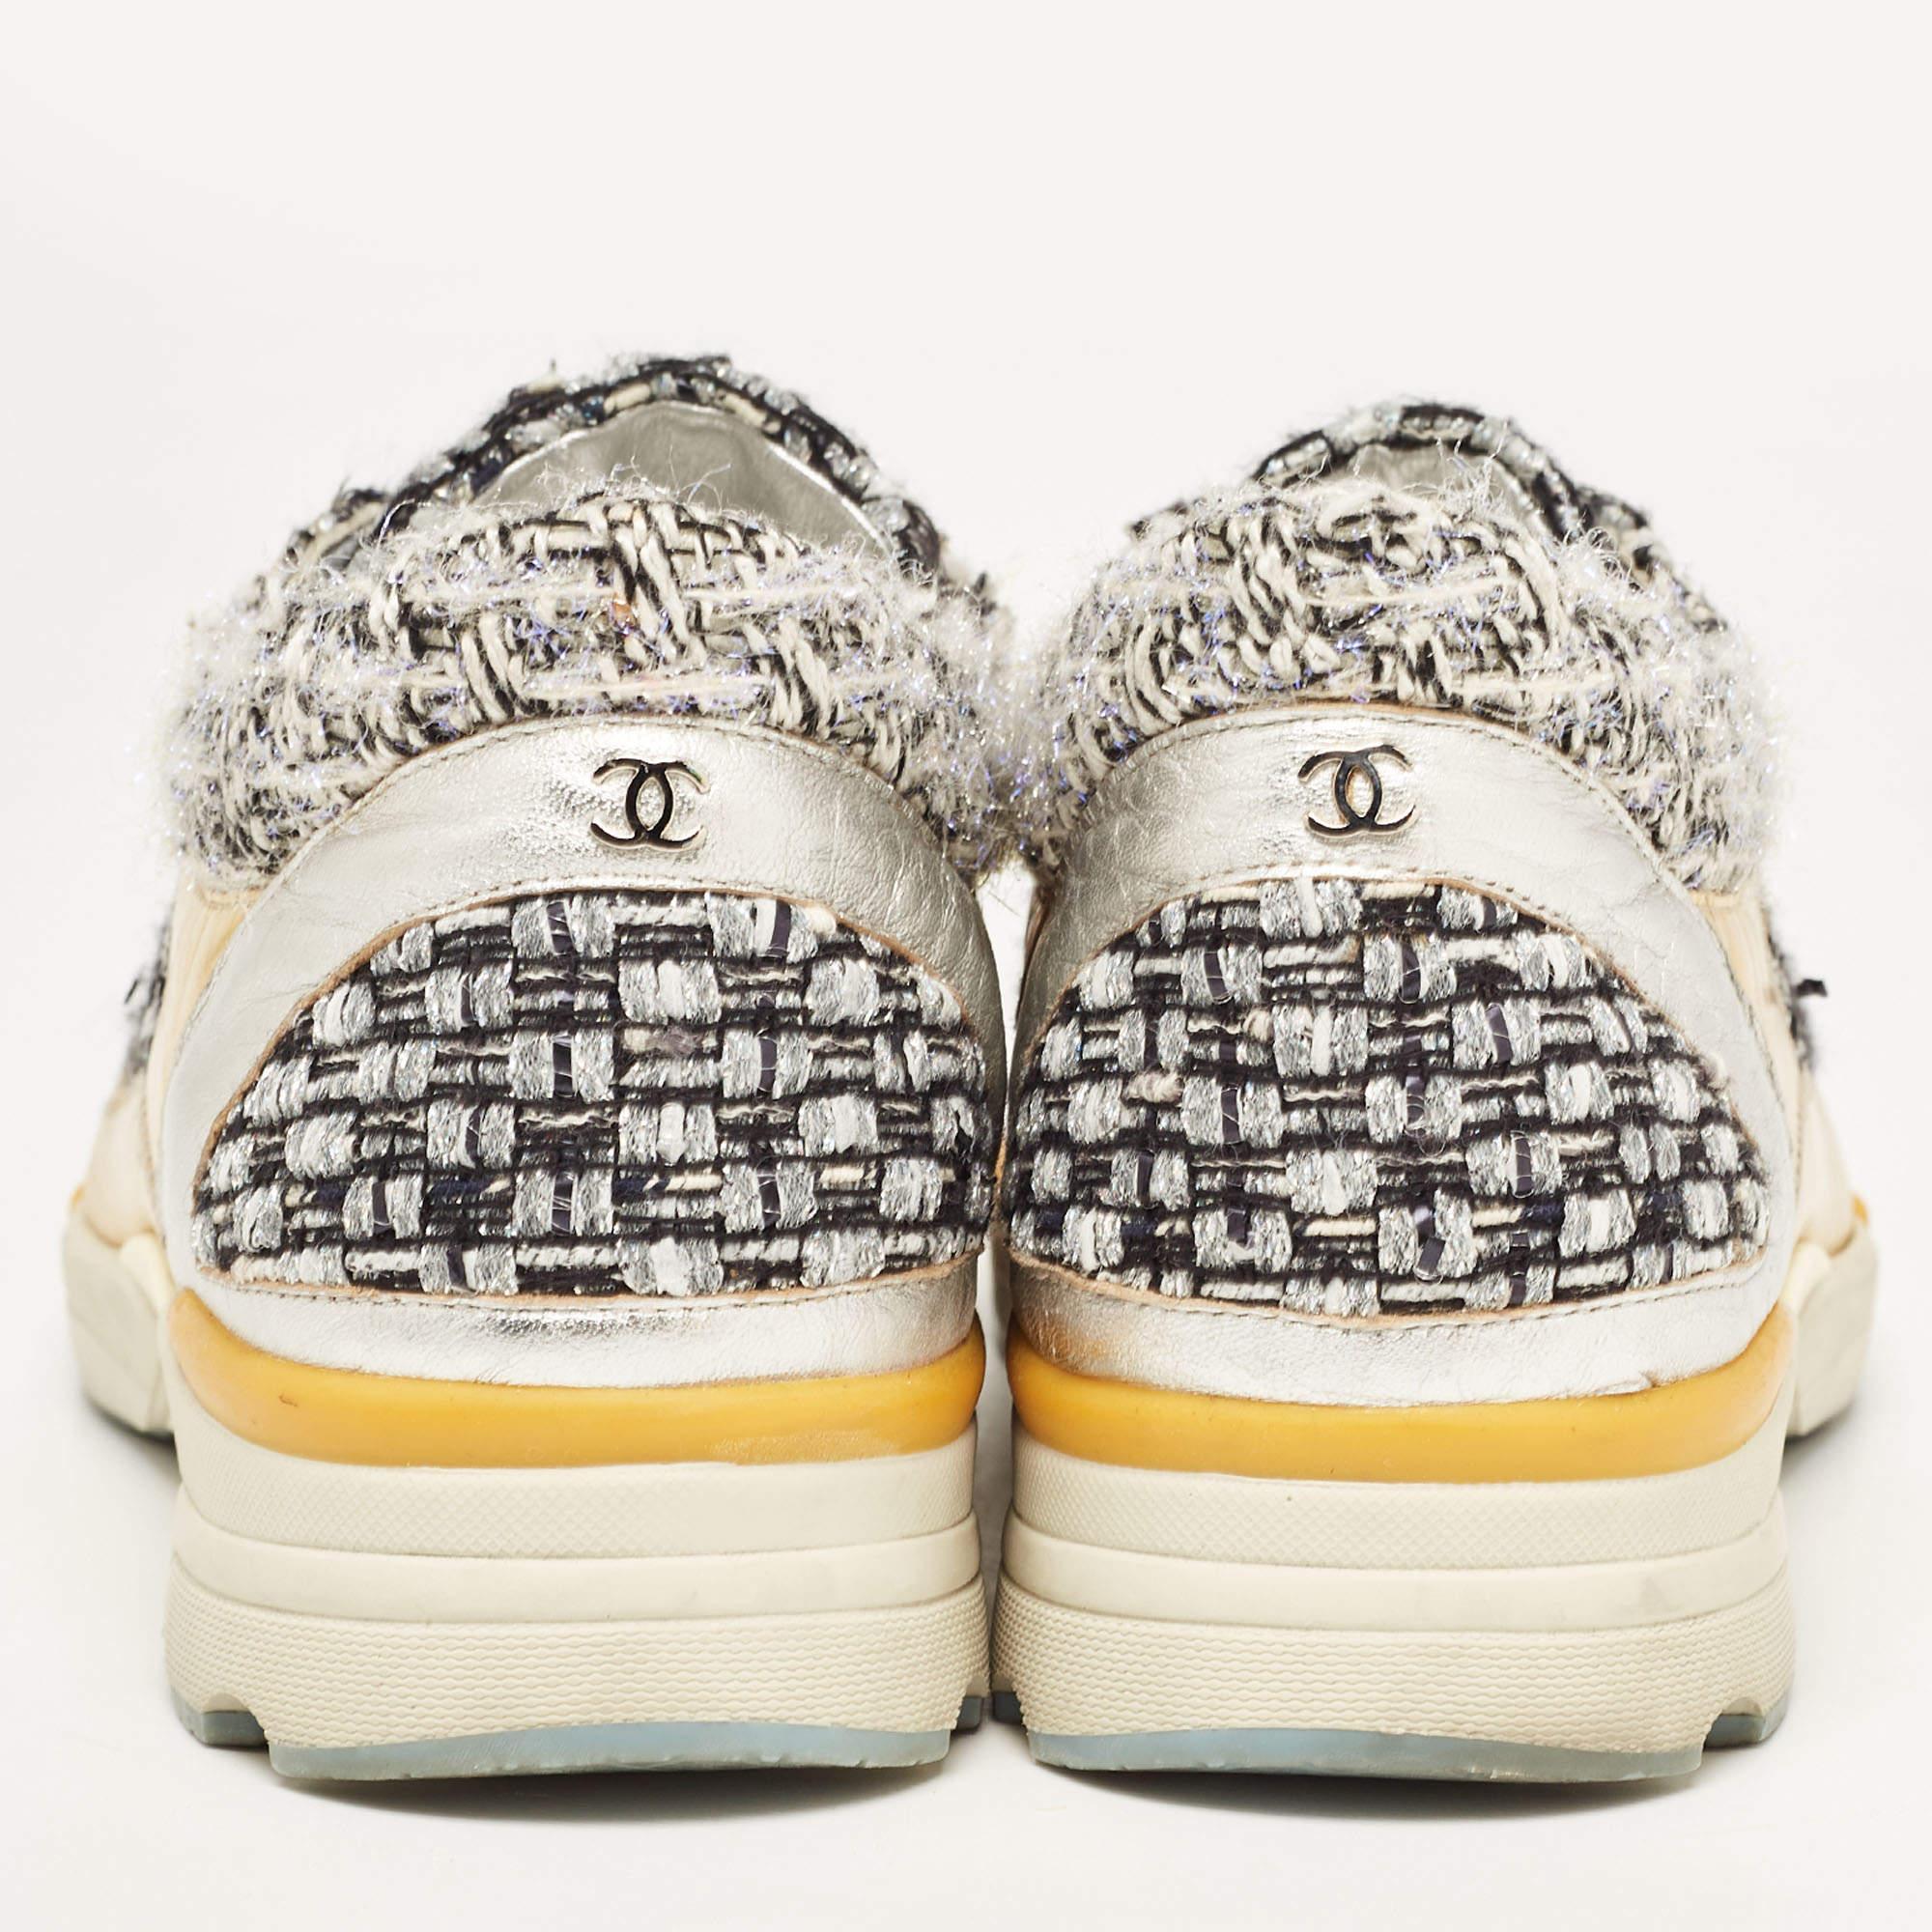 Chanel Tricolor Tweed and Leather CC Low Top Sneakers Size 39.5 For Sale 4